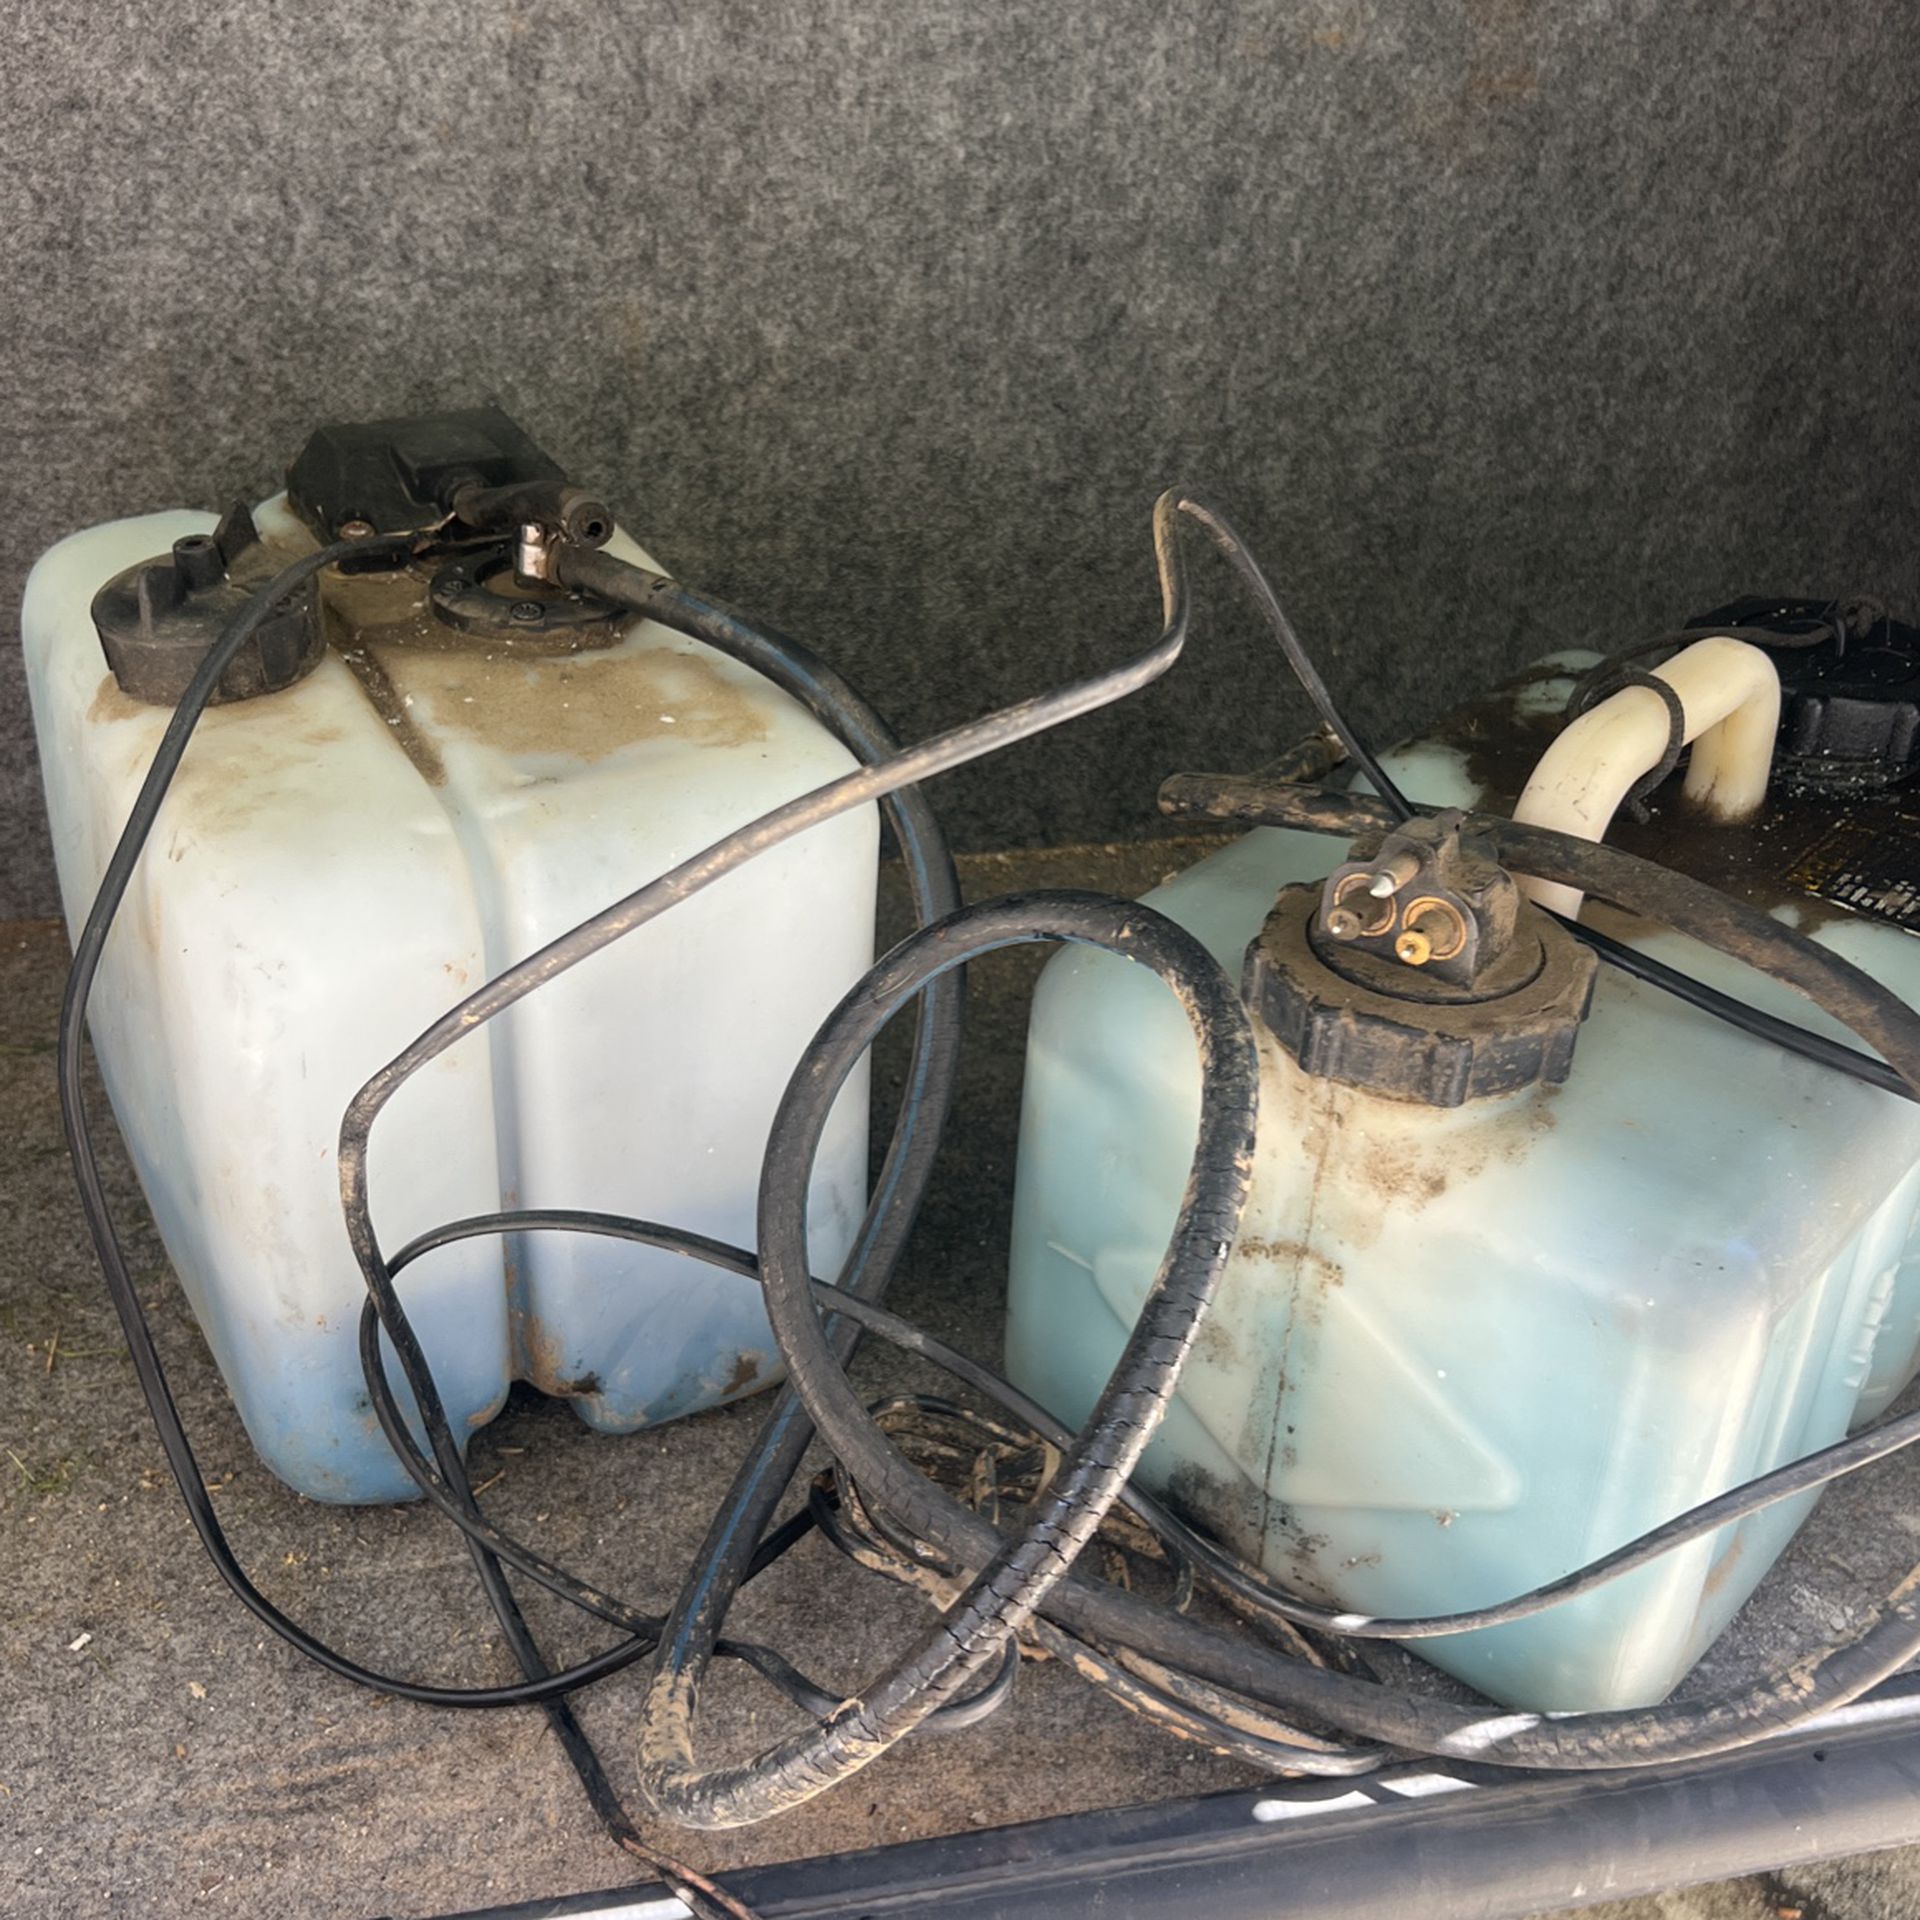 2 Oil Tanks For Outboards